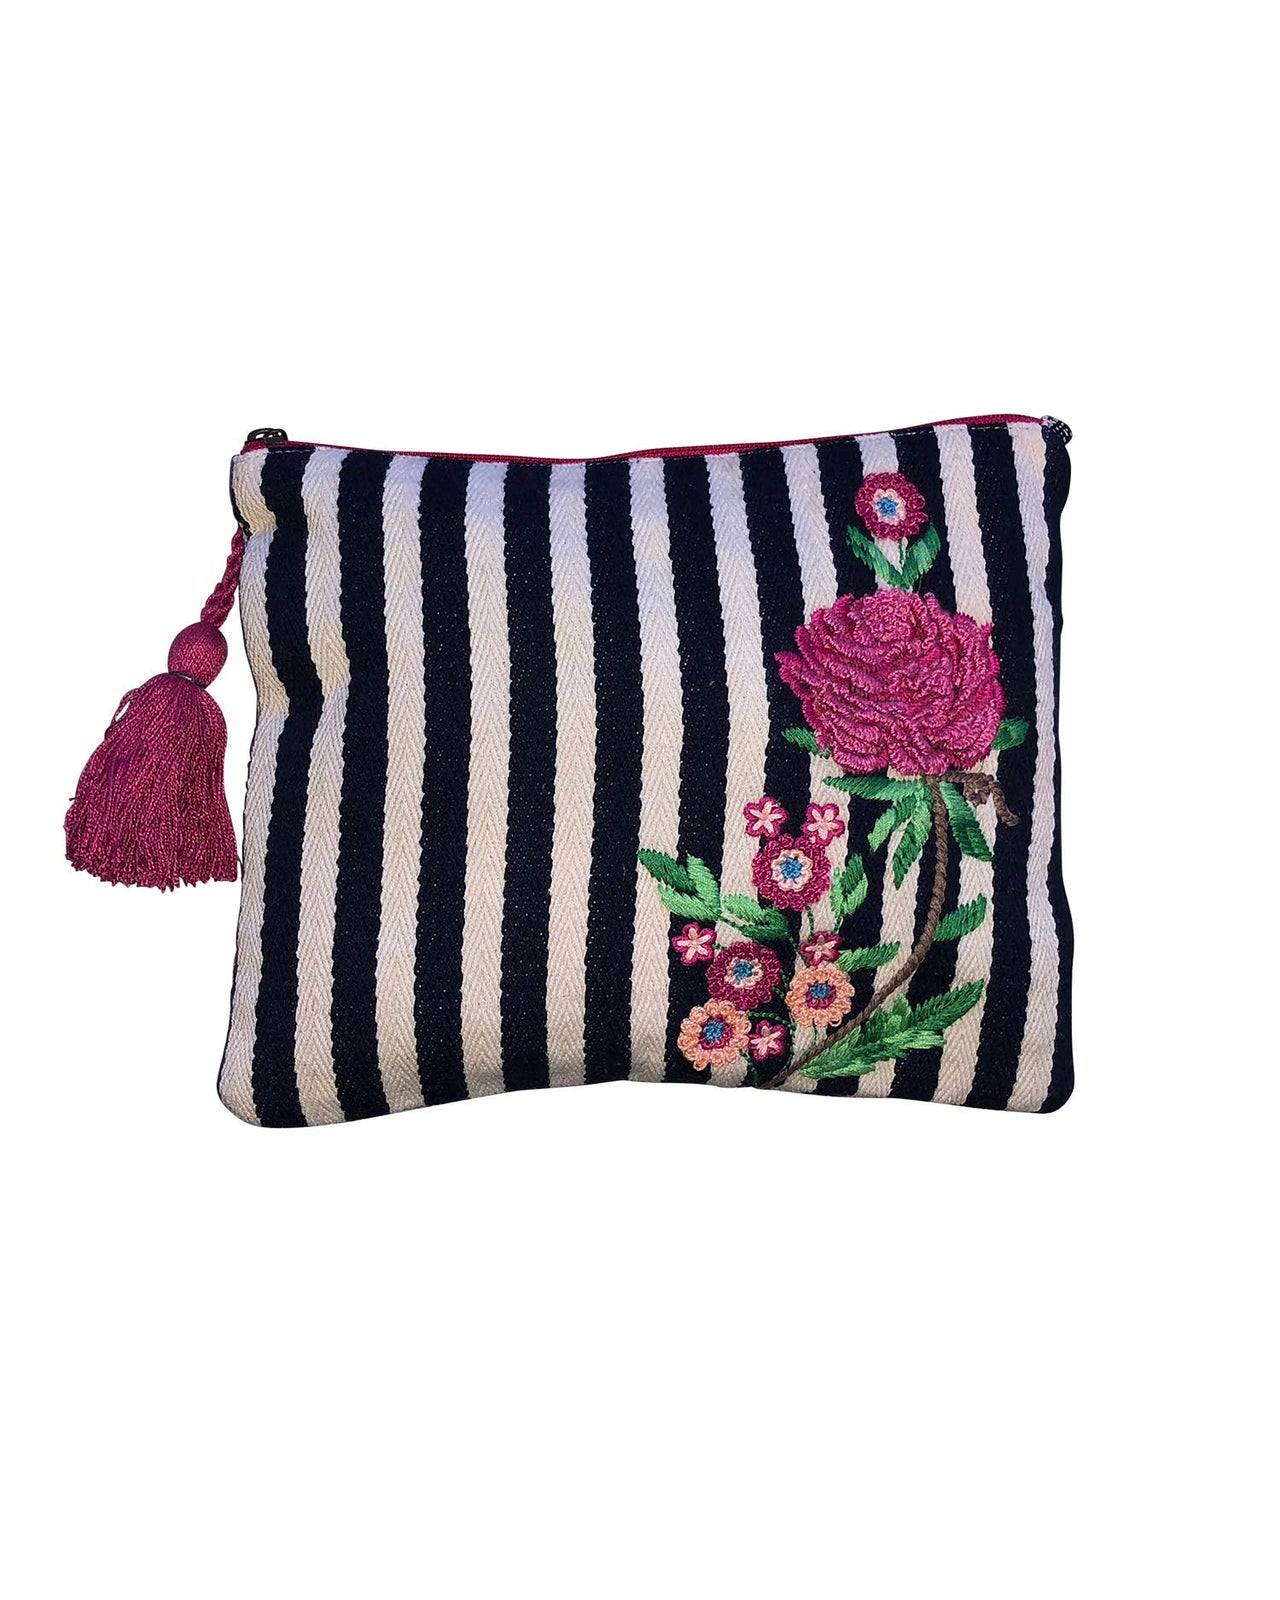 Chloe & Lex - Striped Wristlet with Embroidery - Rubbish Restyled